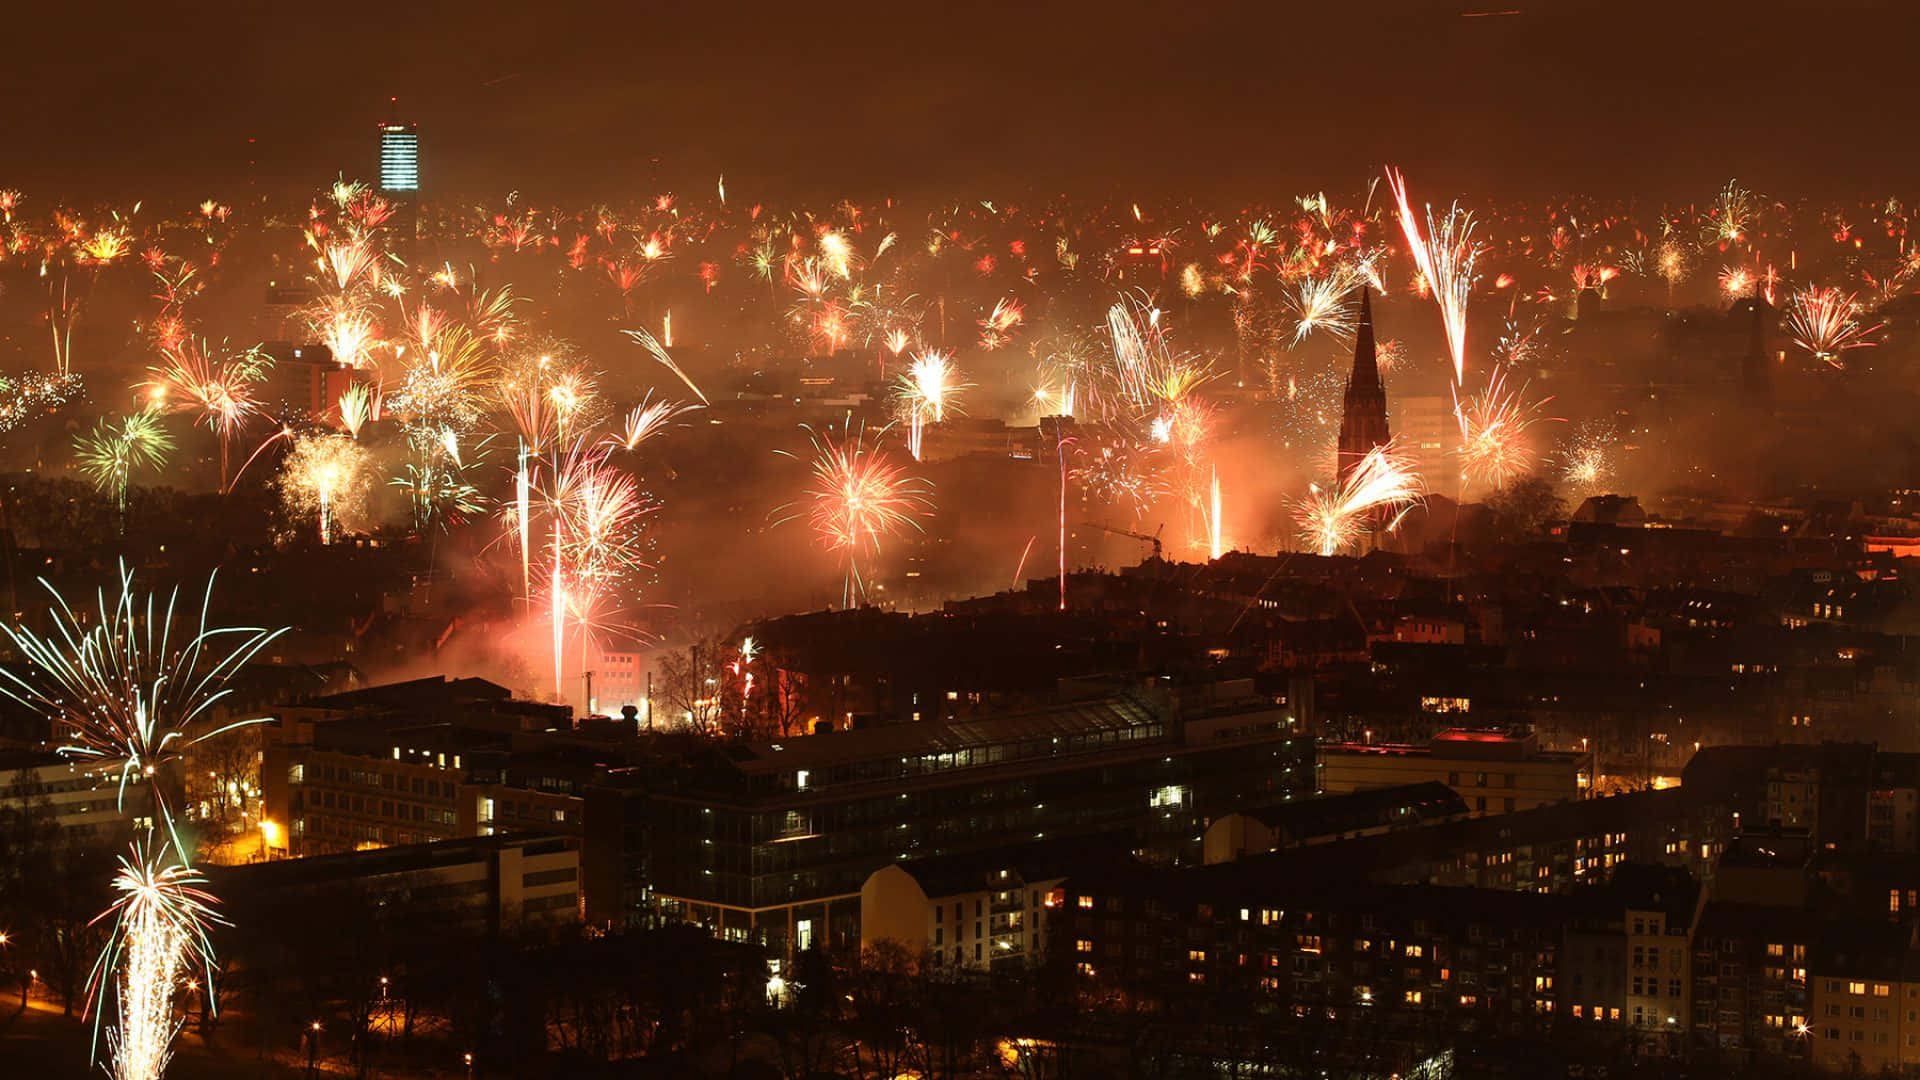 A Spectacular New Year's Eve Celebration